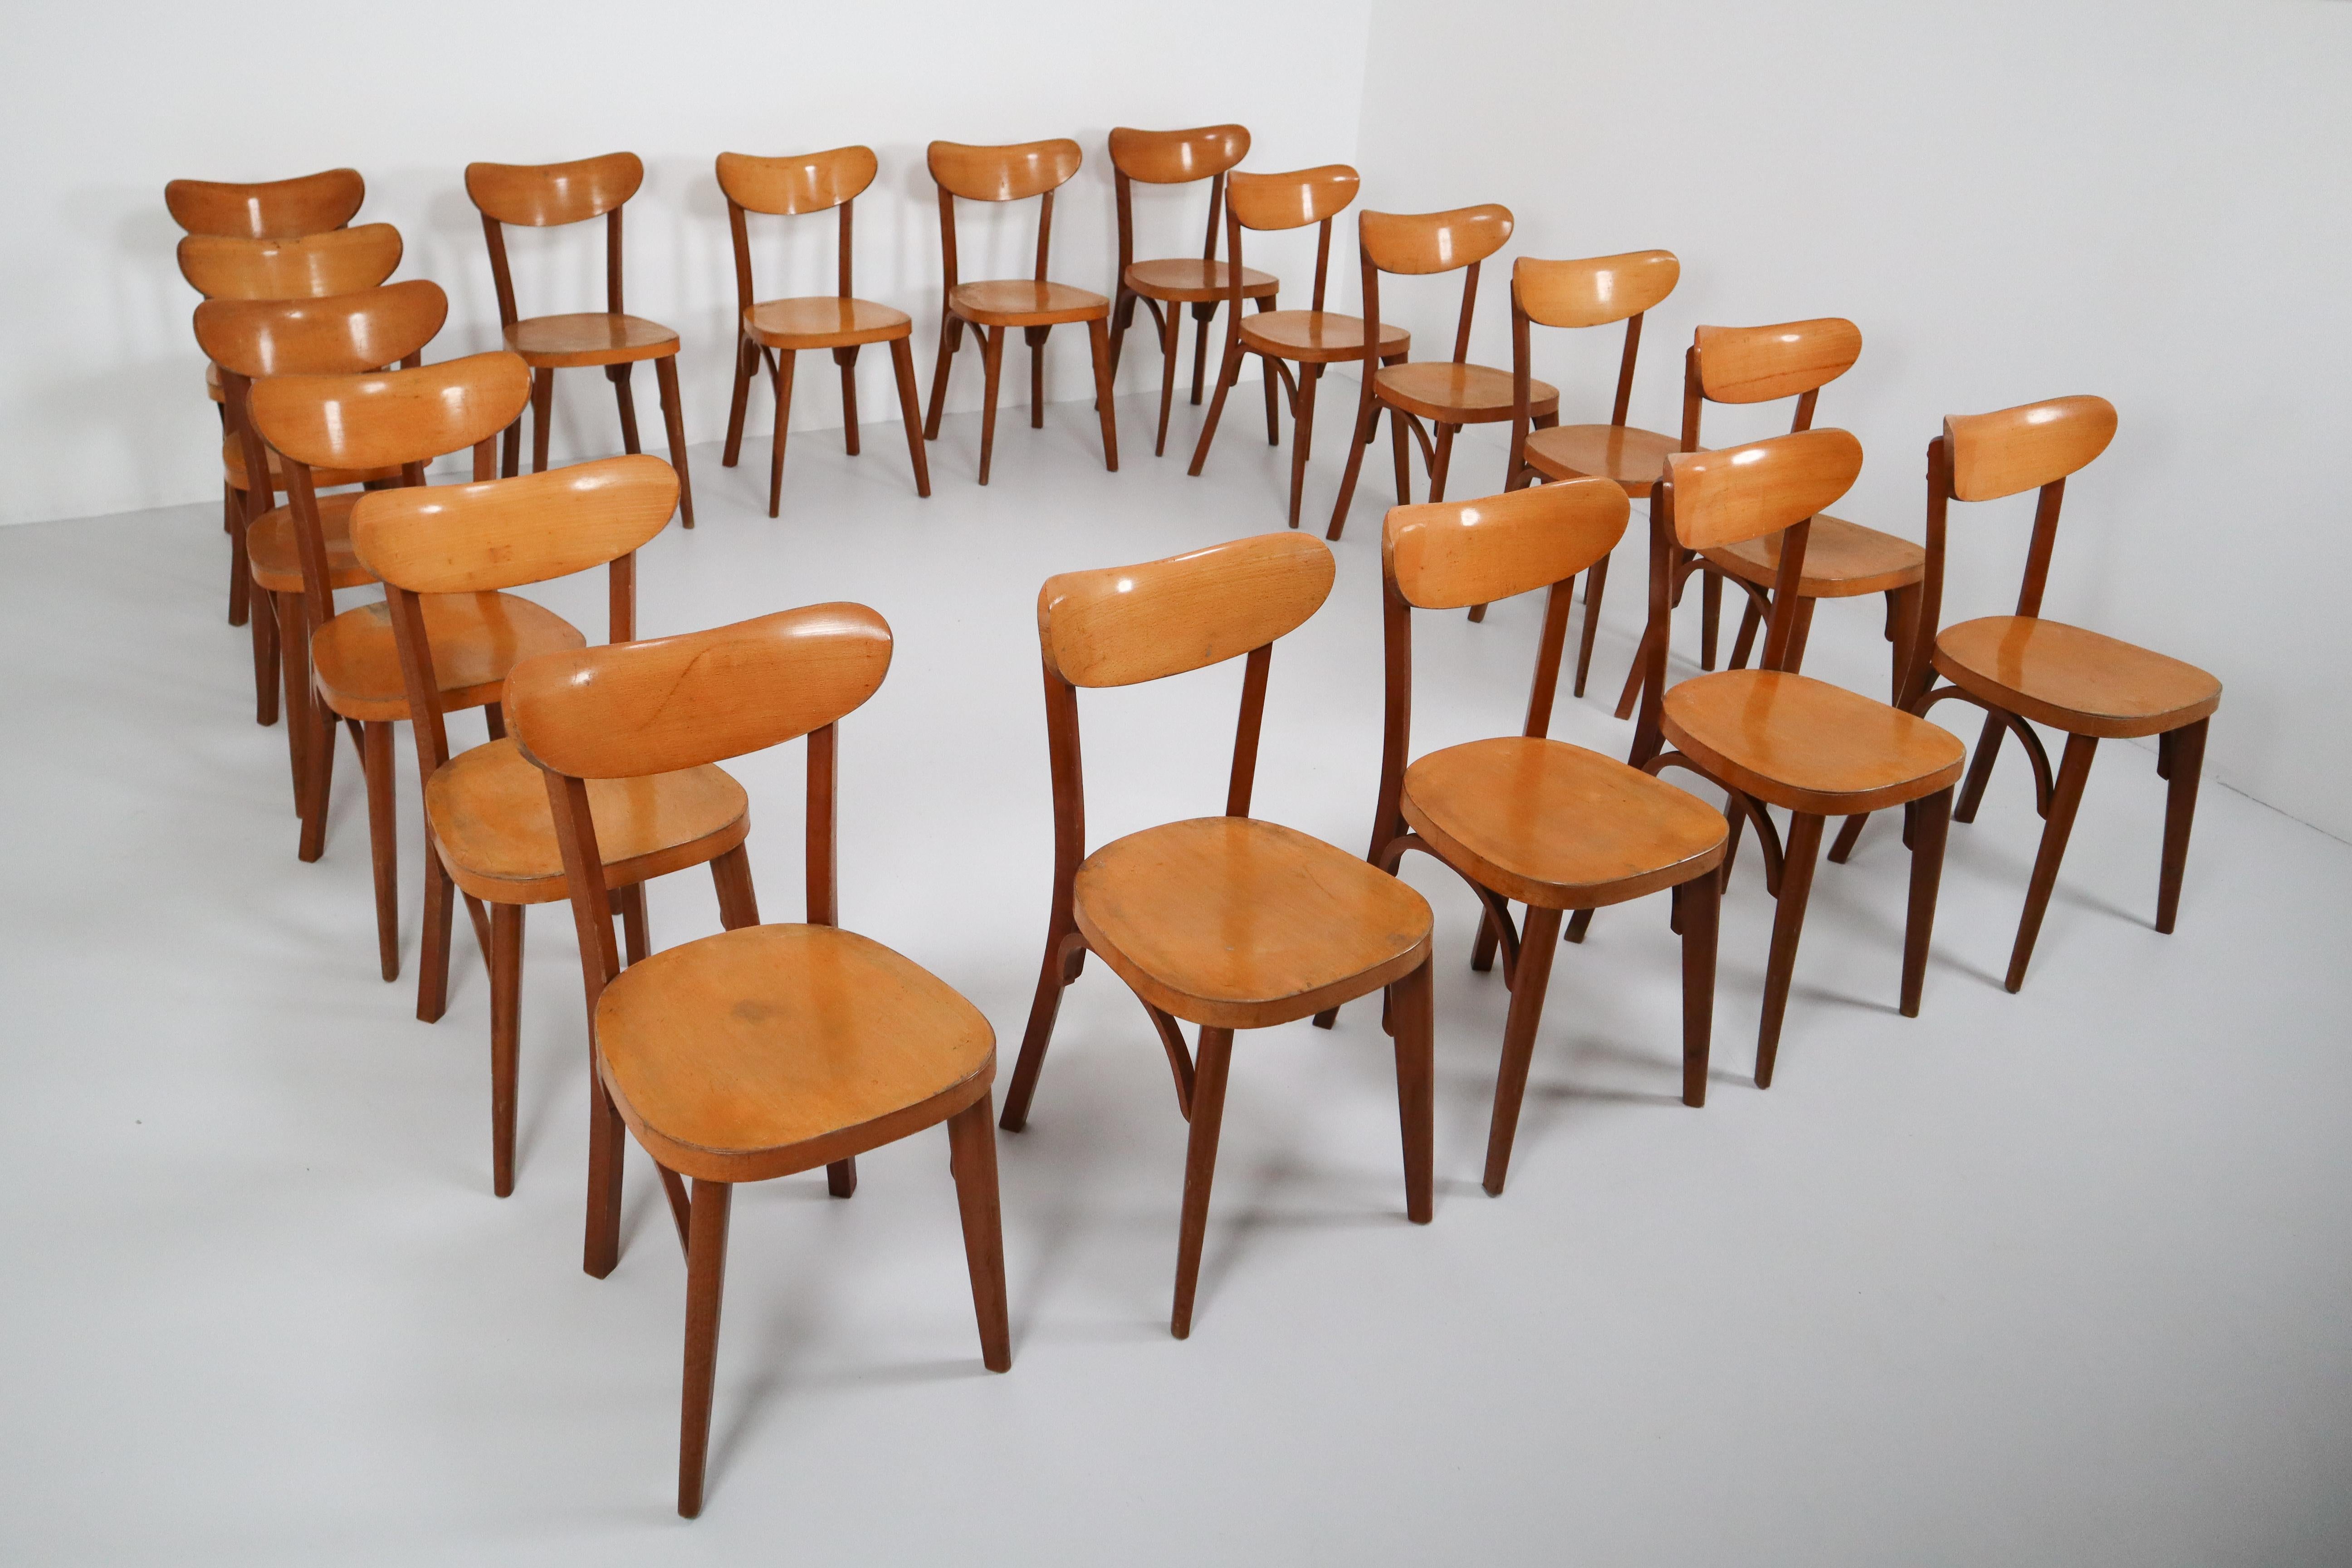 Set of 20 x comfortable Beech chairs, produced in France in the 1950s. These French modern design bistro chairs have a beech bentwood frame and beautifully curved beech plywood seats. Minor wear consistent with age and use. These chairs are in a